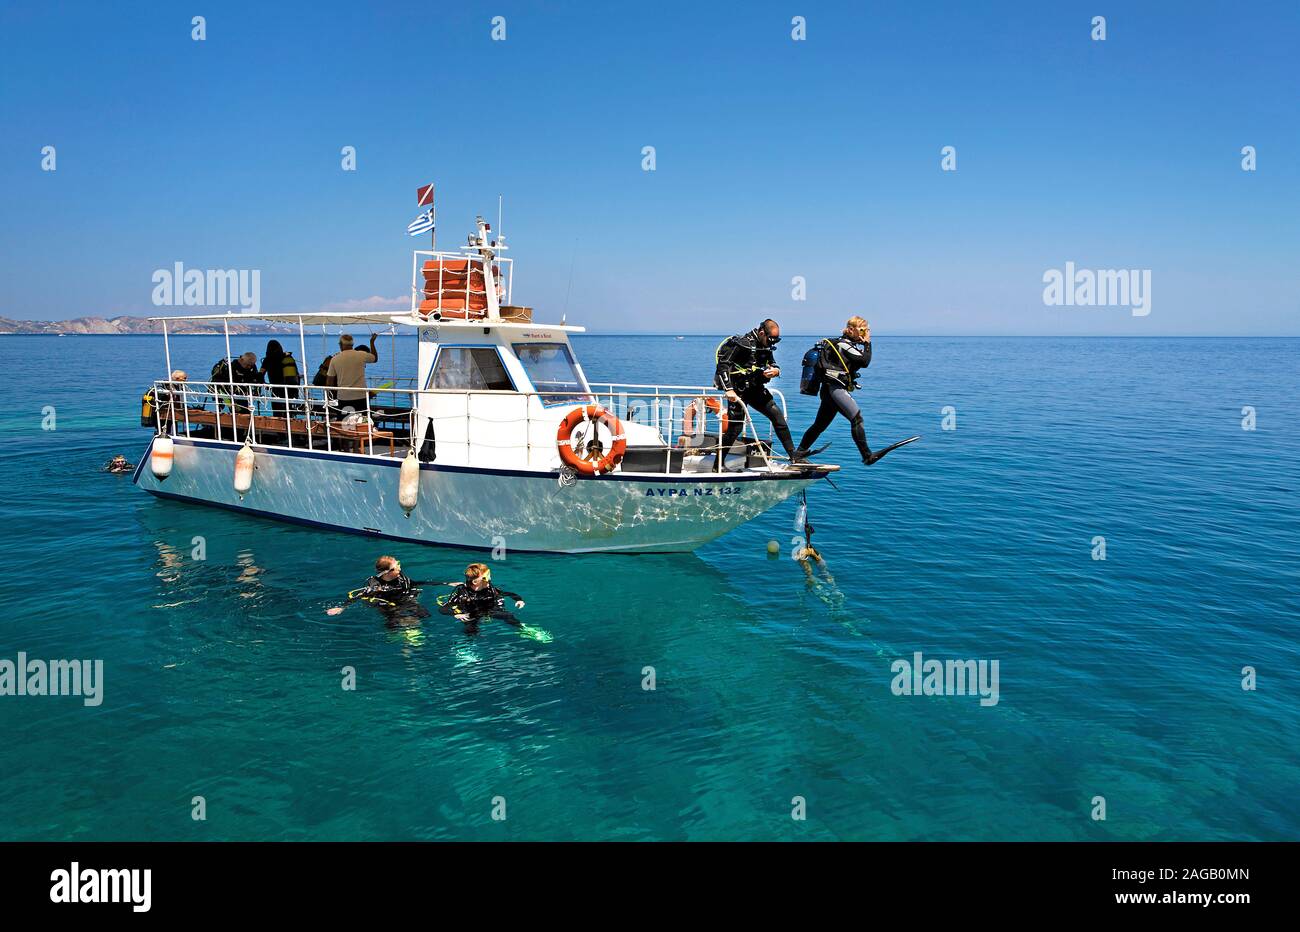 Scuba diver jumping from boat in the sea, Zakynthos island, Greece Stock Photo